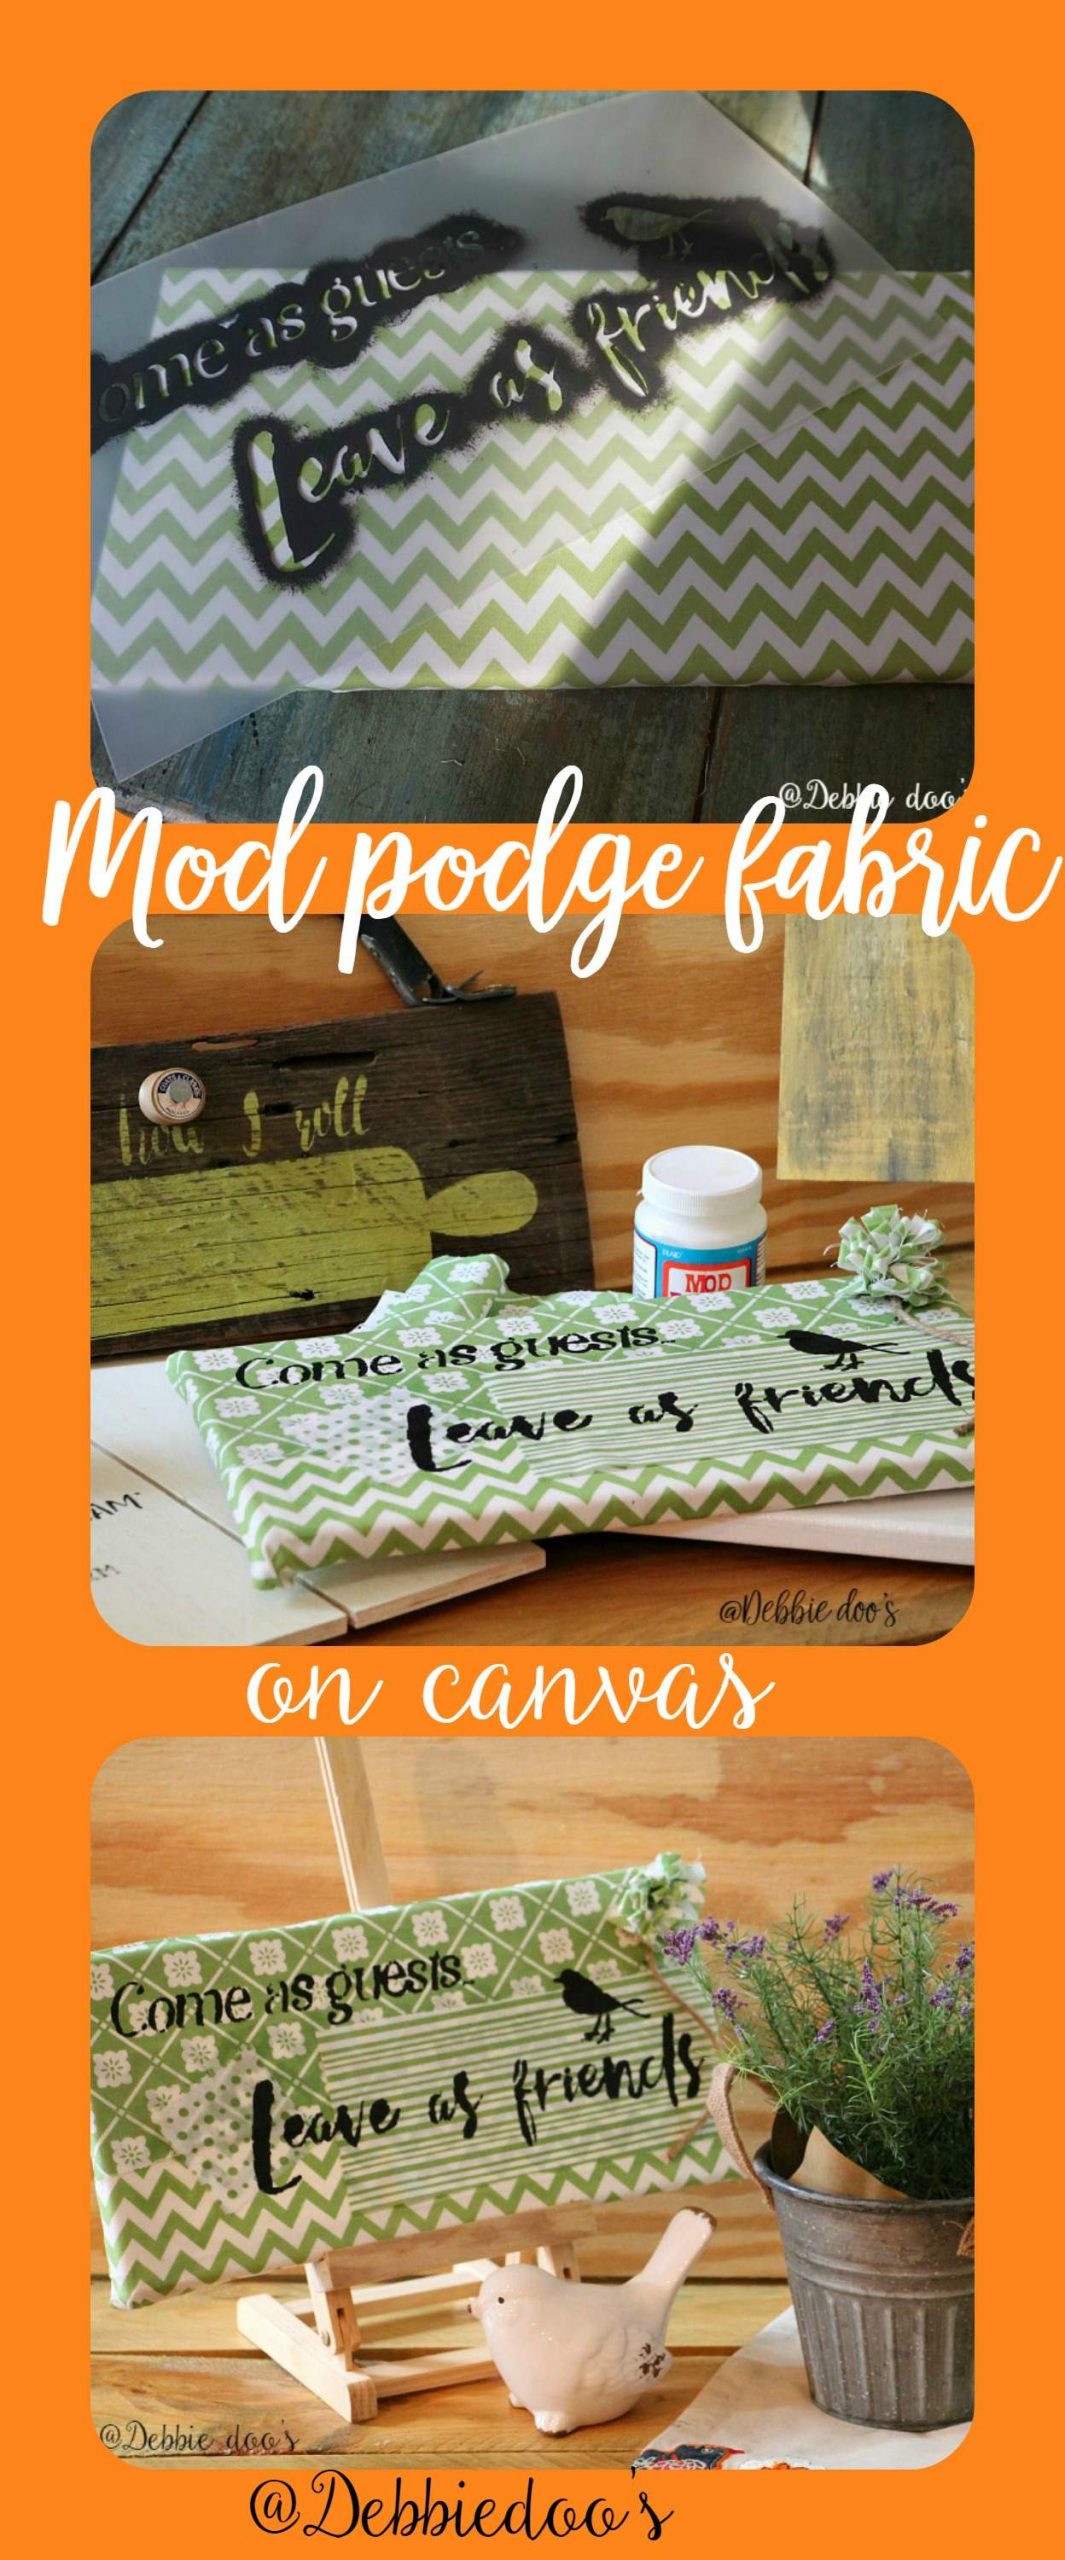 How to Mod Podge Fabric on Canvas in 10 Easy Steps